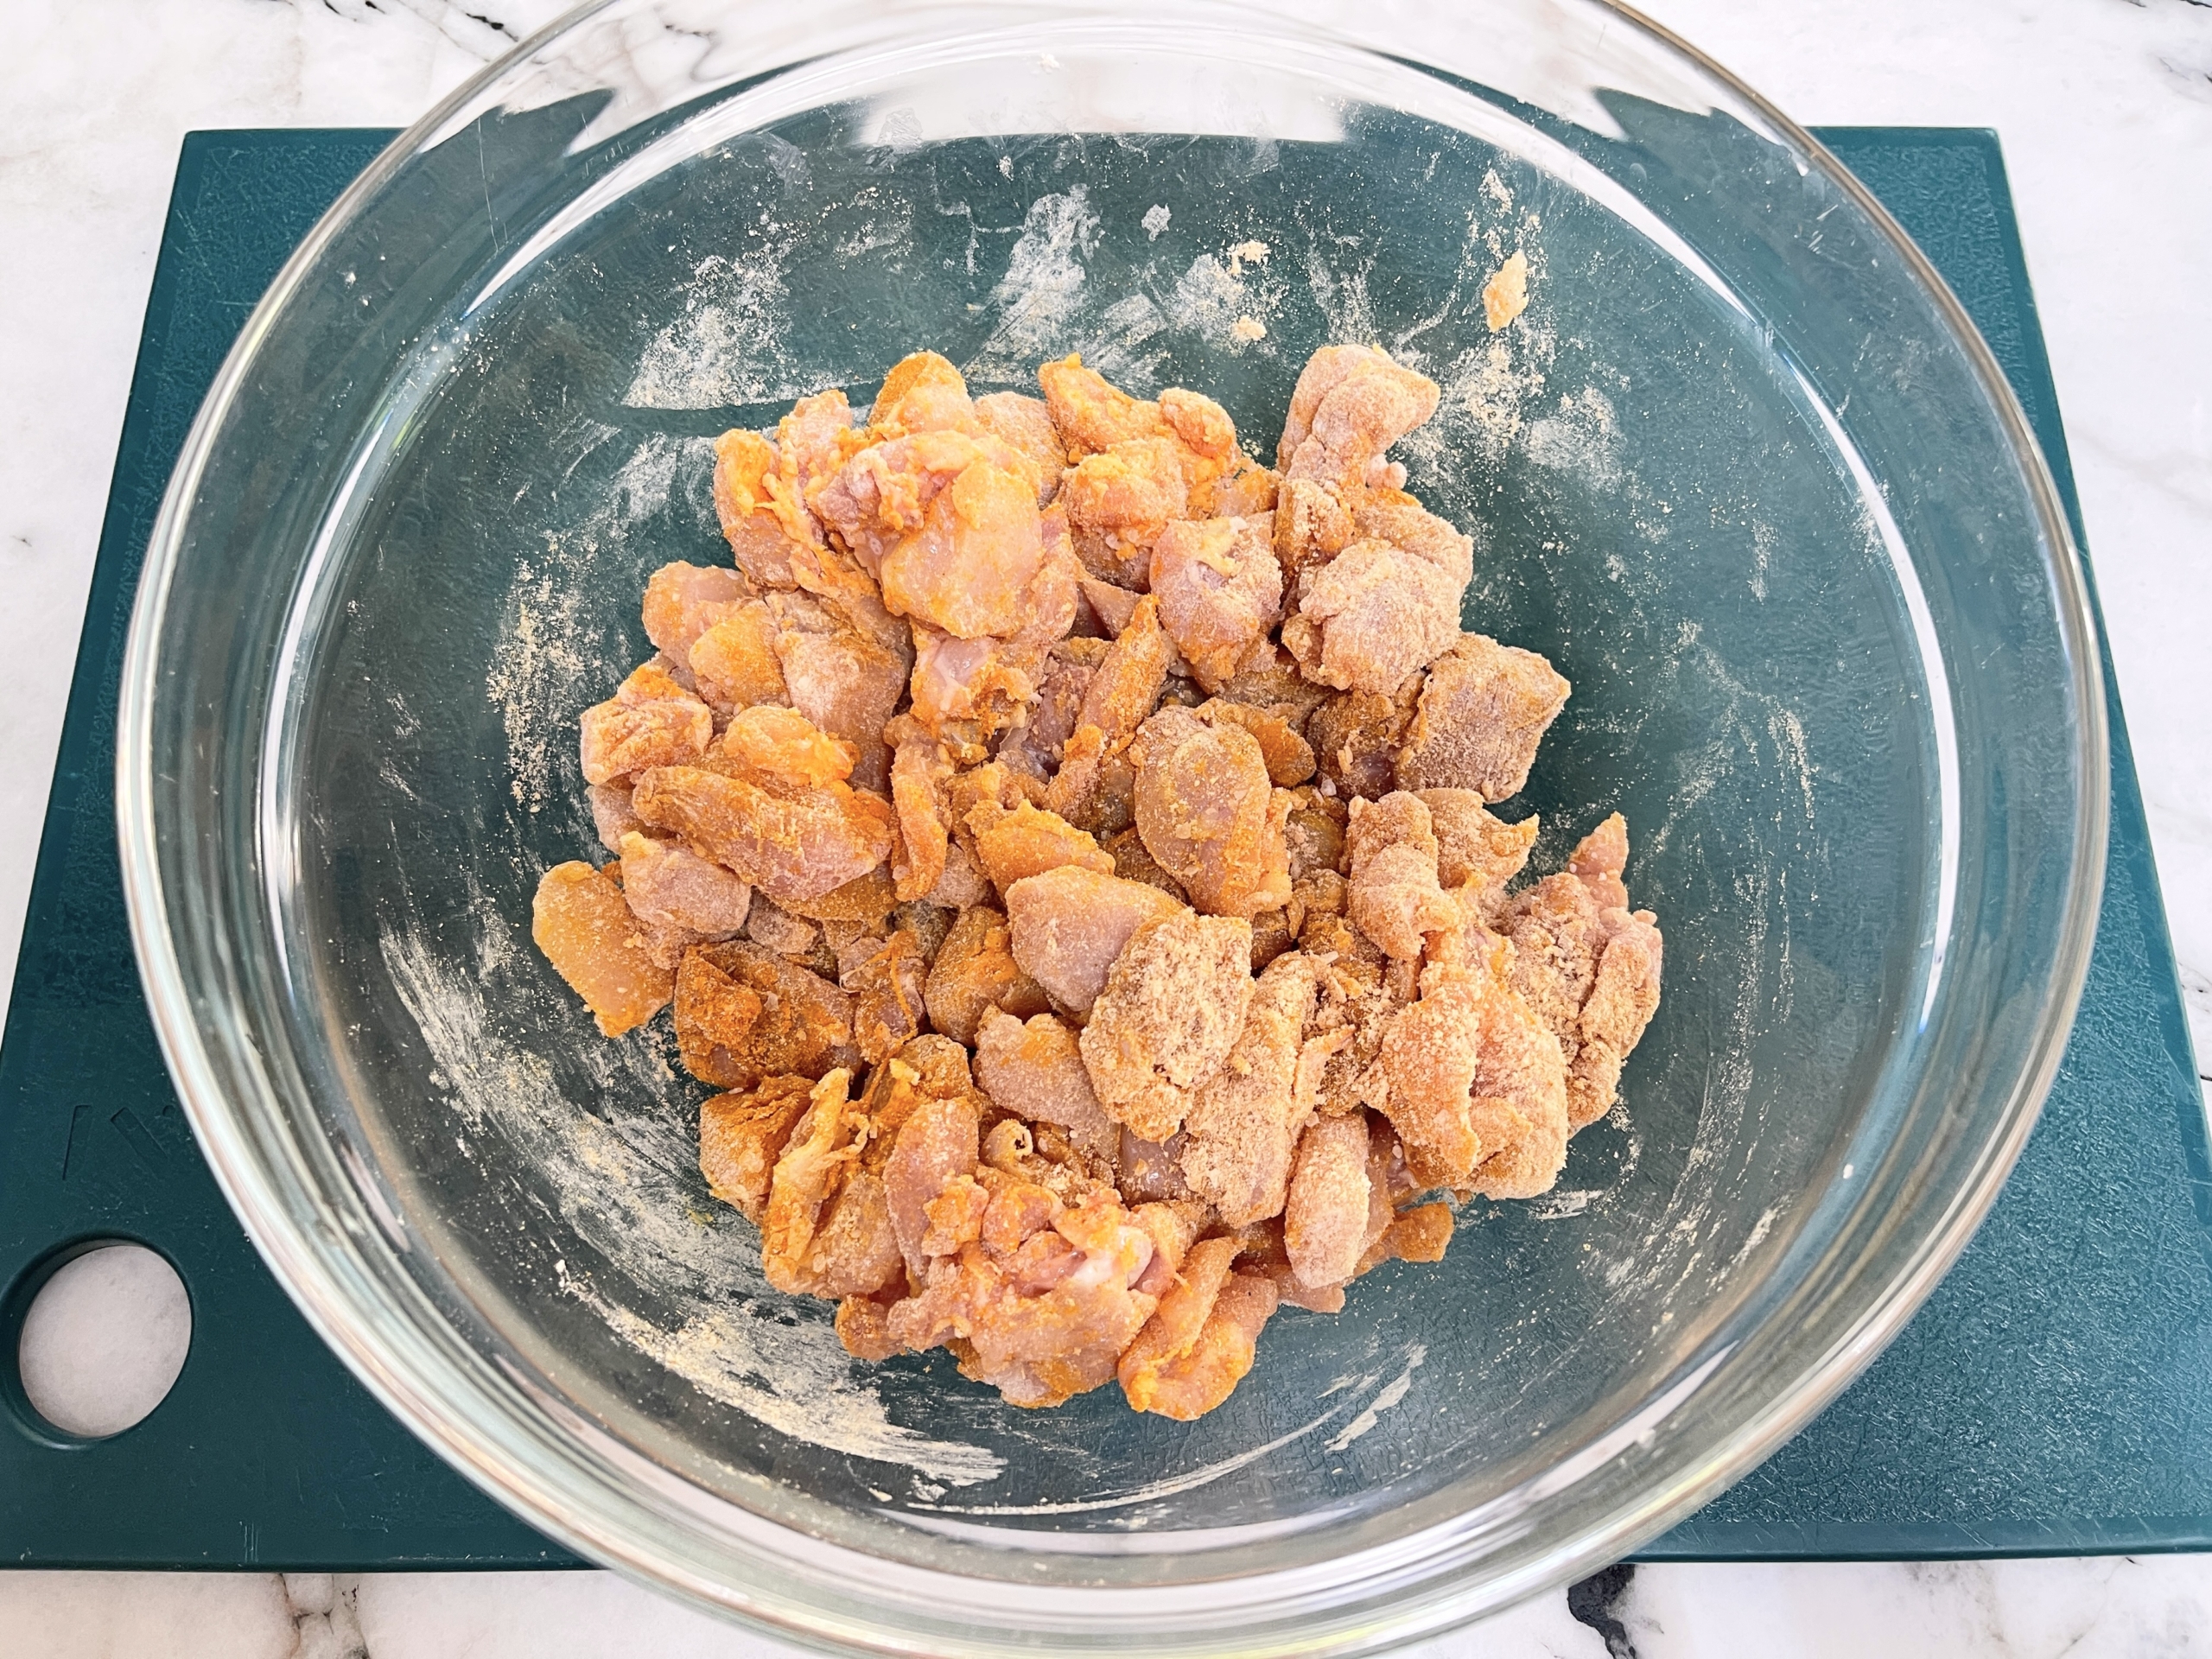 thoroughly combine the turmeric, gf flour and salt with the chicken